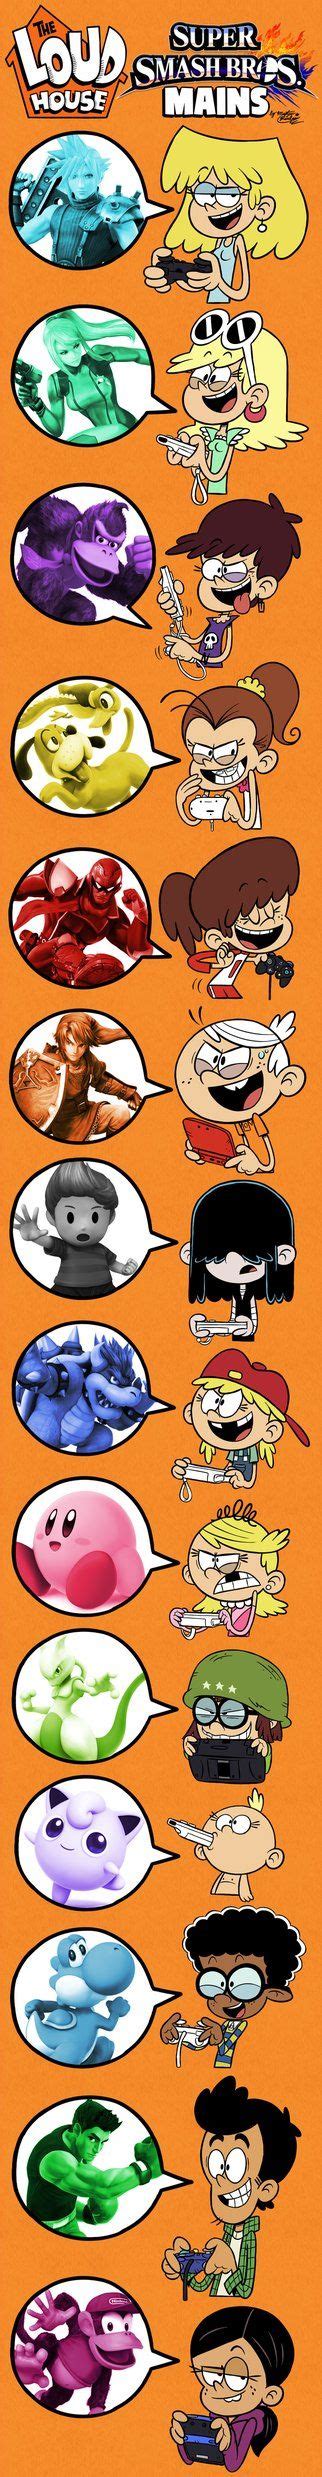 The Loud House And Their Smash Bros Mains By Master Rainbow